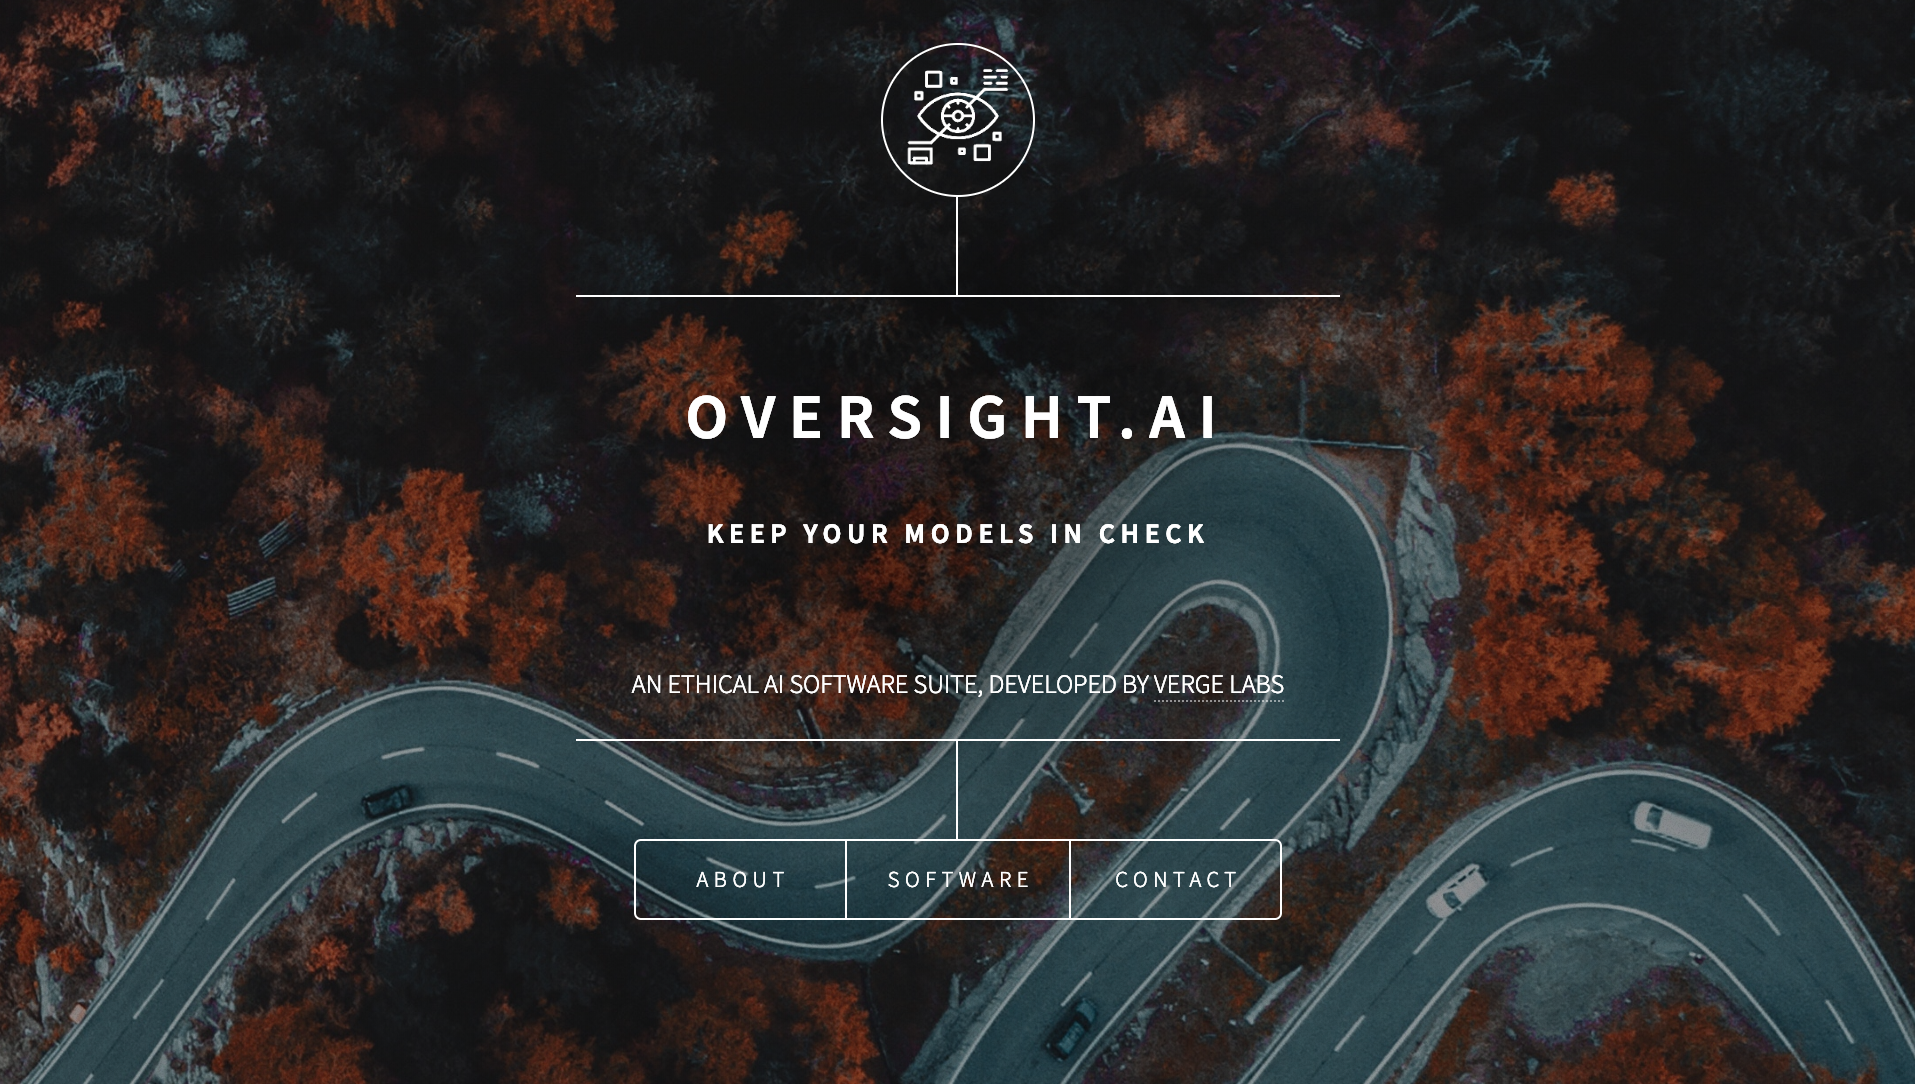 Announcing Oversight.ai